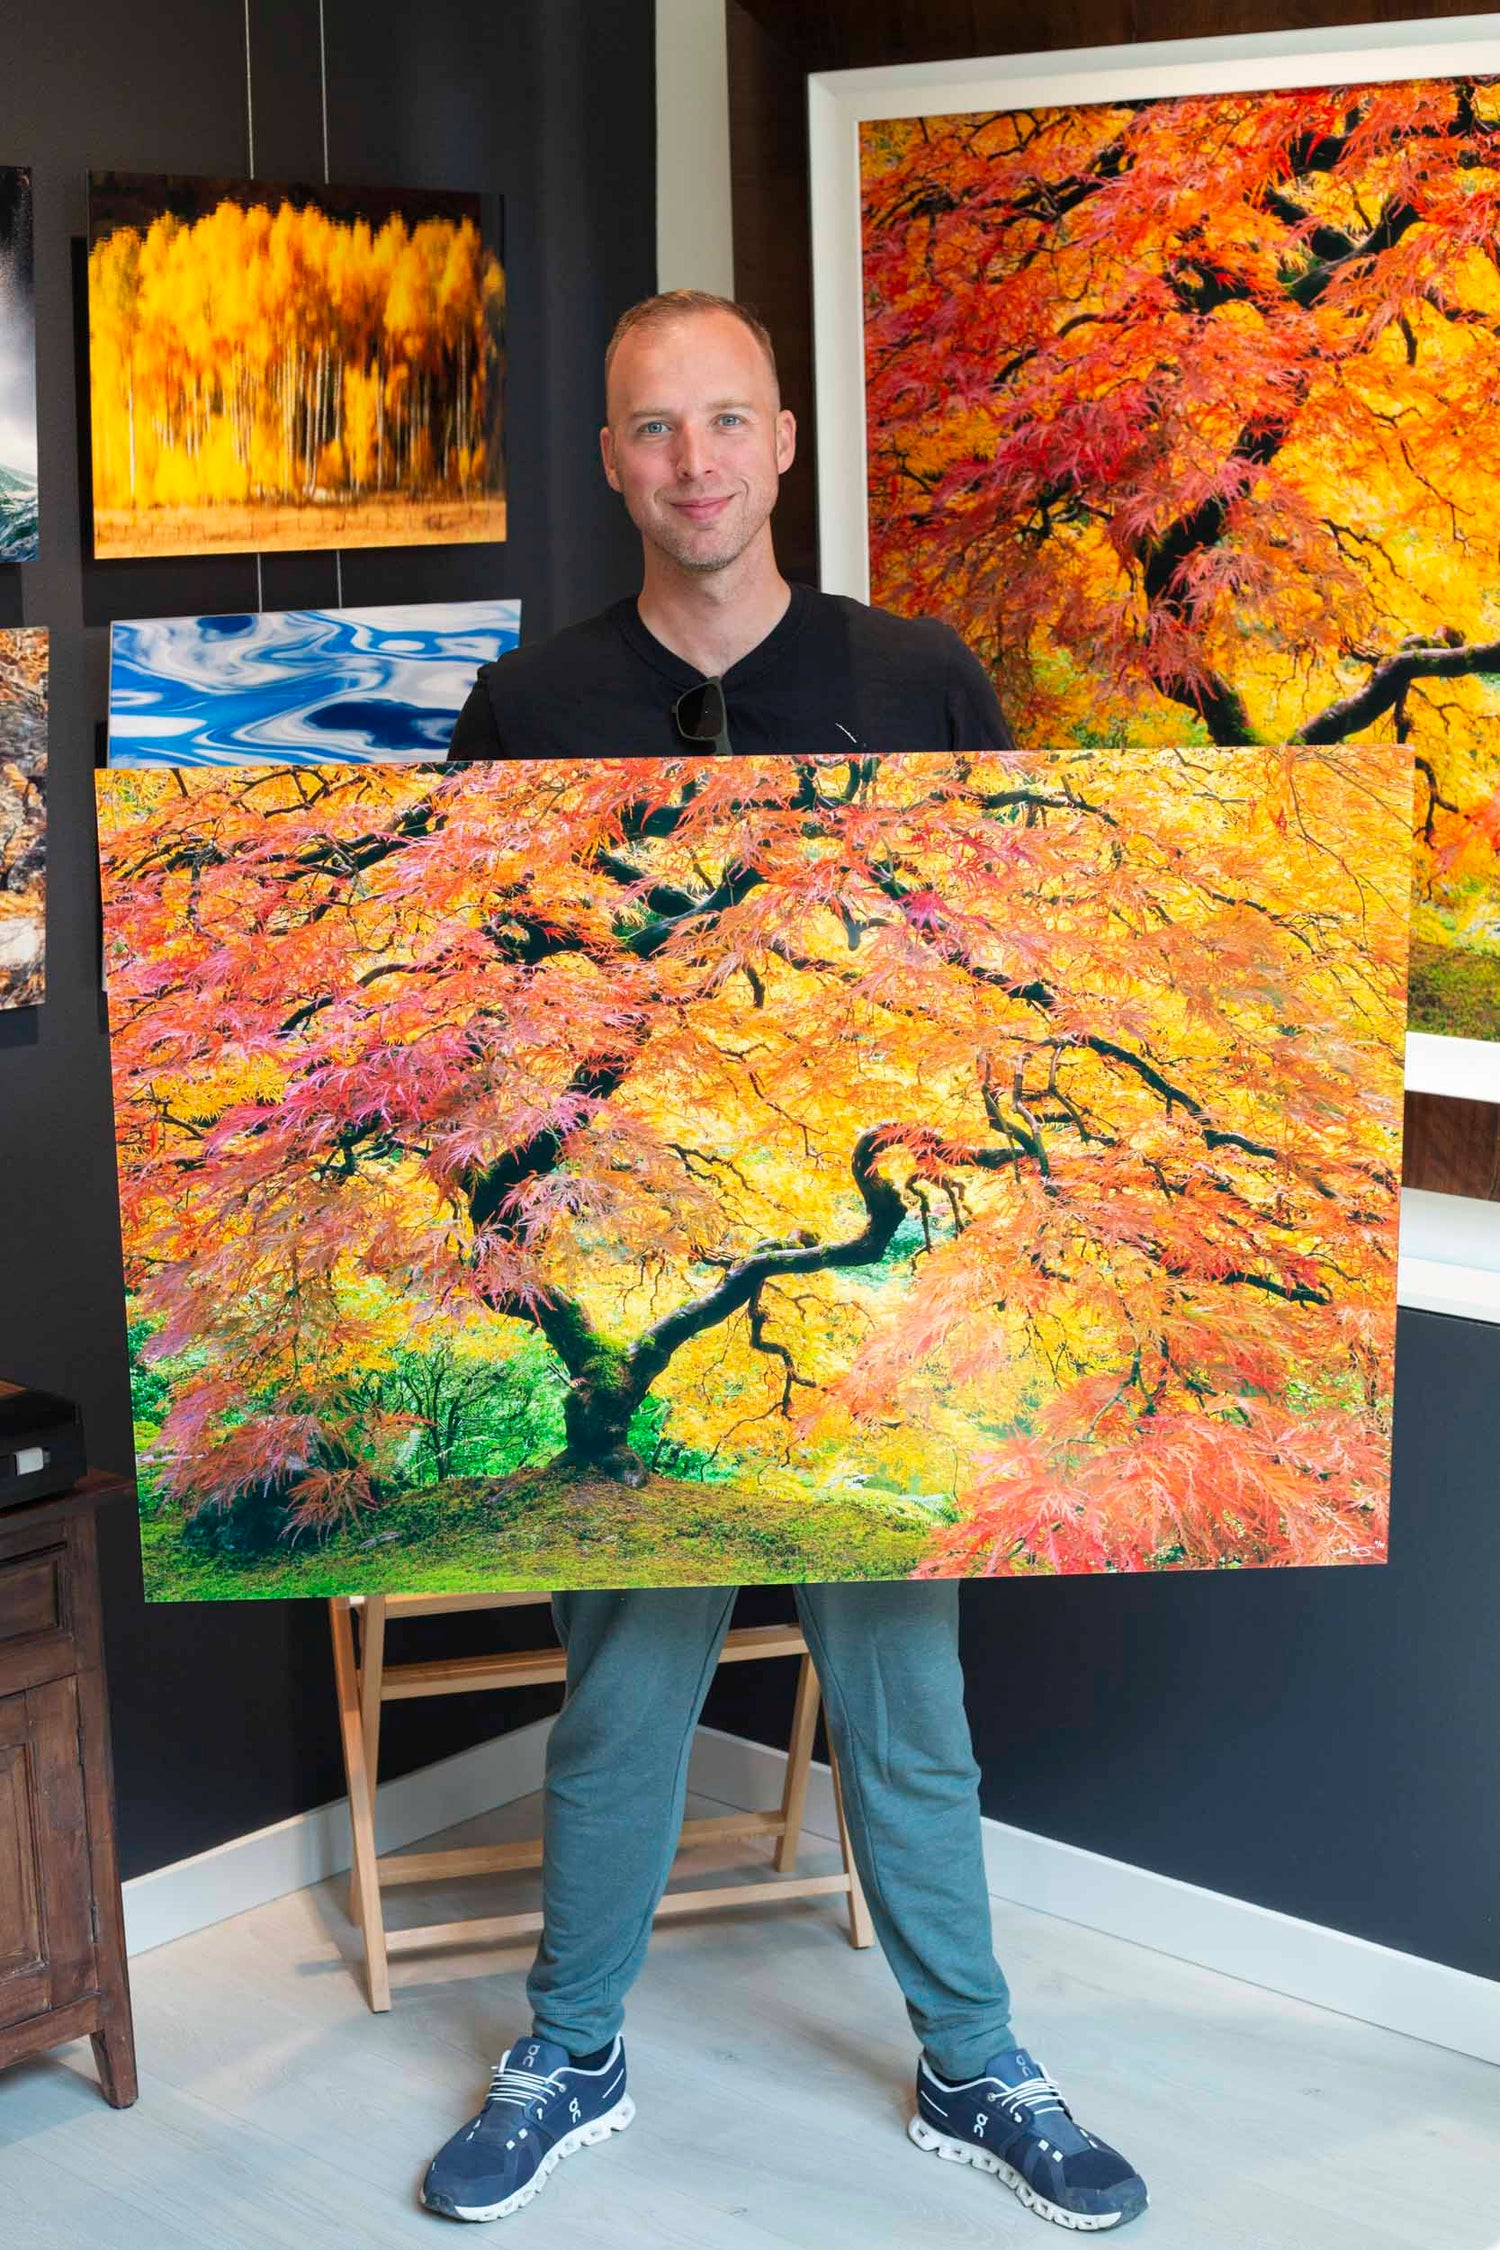 A Lars Gesing fine art nature photography art collector in the West Seattle art gallery who was happy to review the business with a fine art photograph of the famous Japanese Maple tree in the Portland Japanese Garden during peak fall colors for sale.